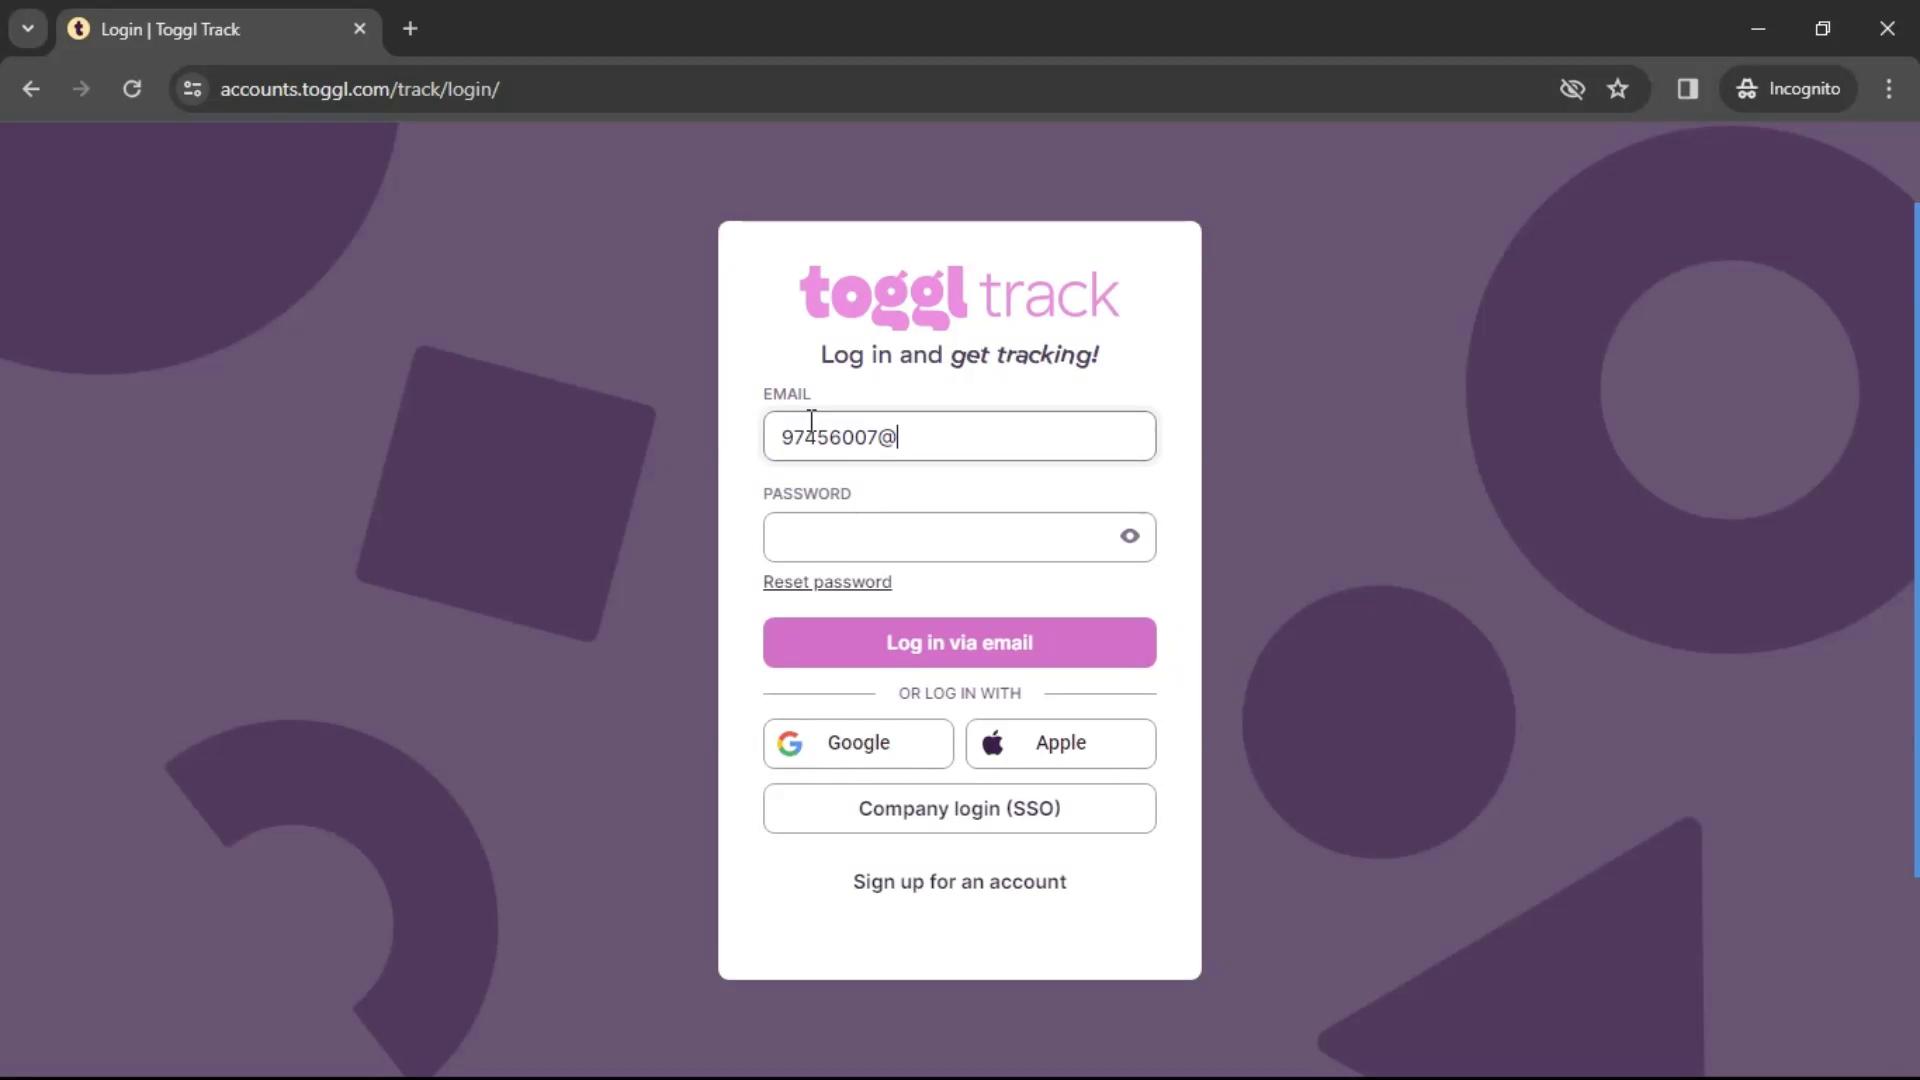 Screenshot of Resetting password on Toggl Track